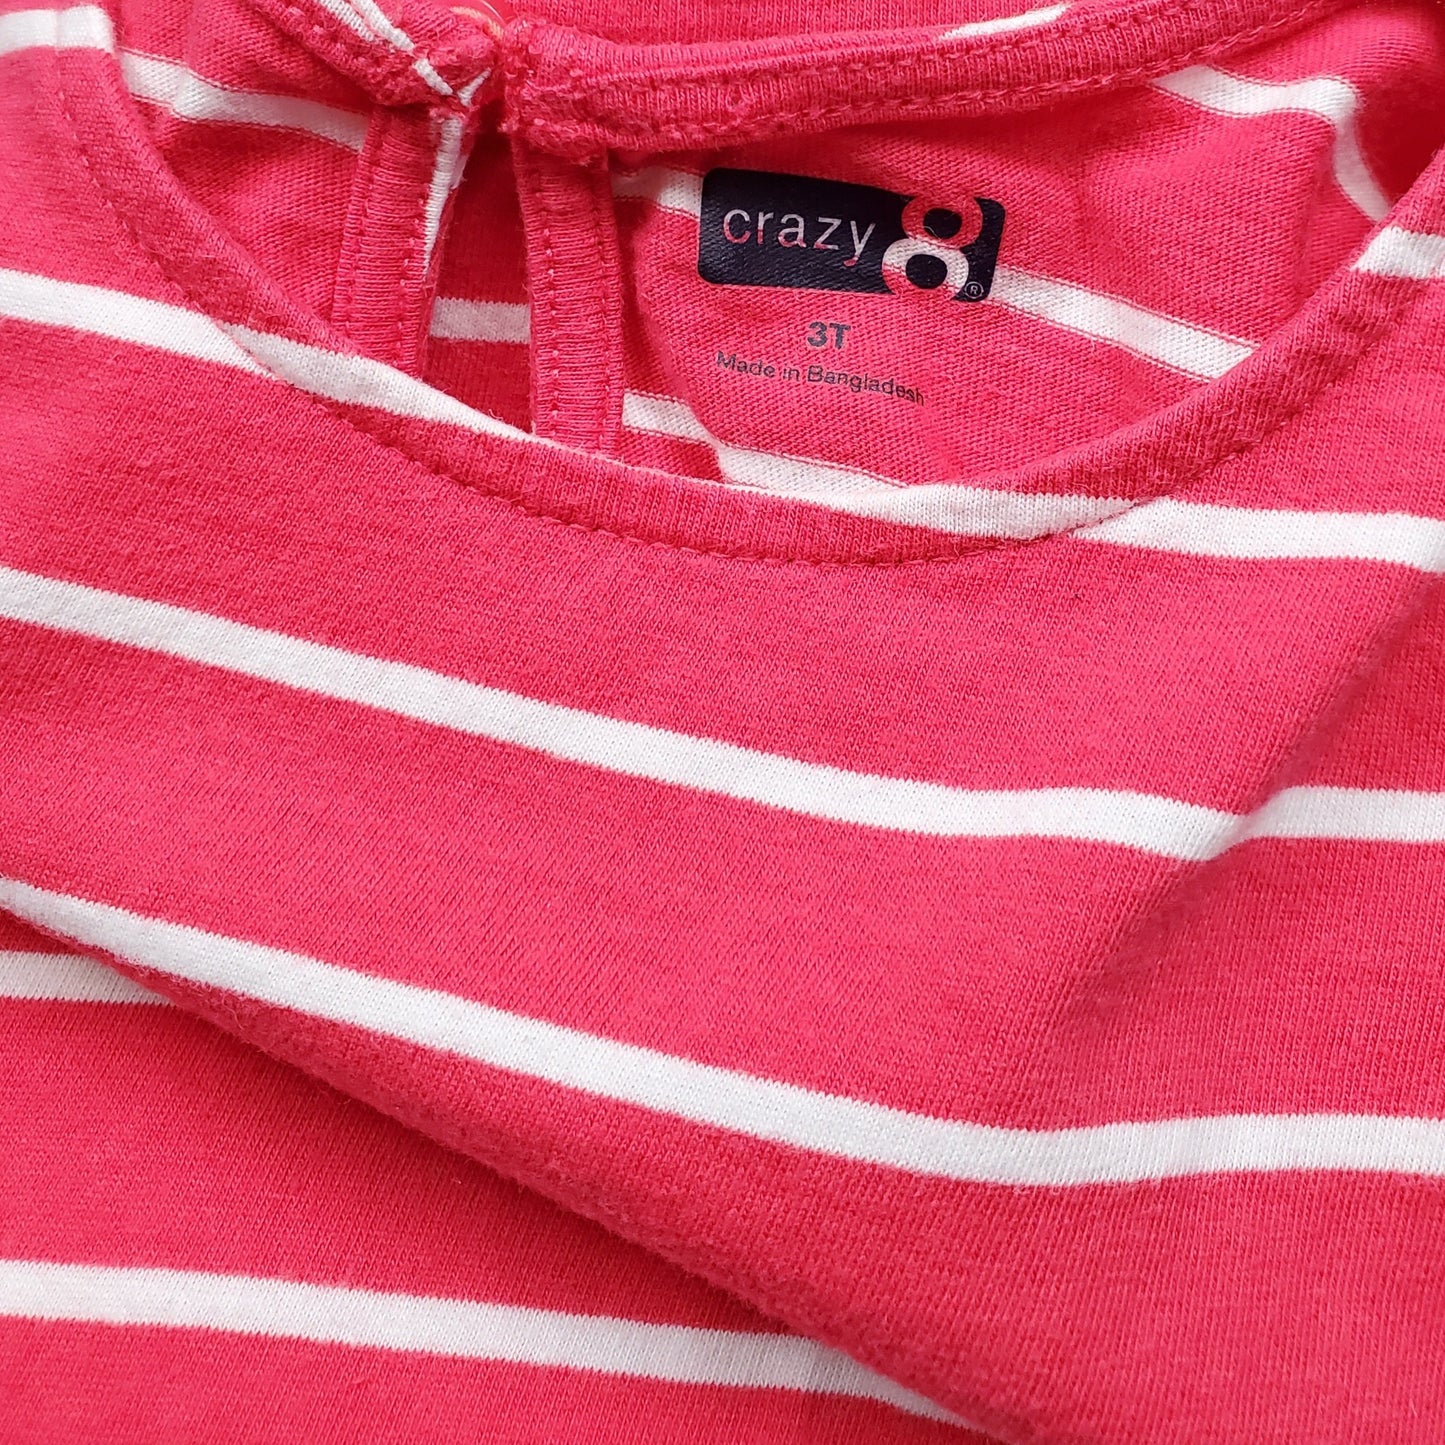 Crazy 8 Girls Pink White Striped Top 3T Used View 3